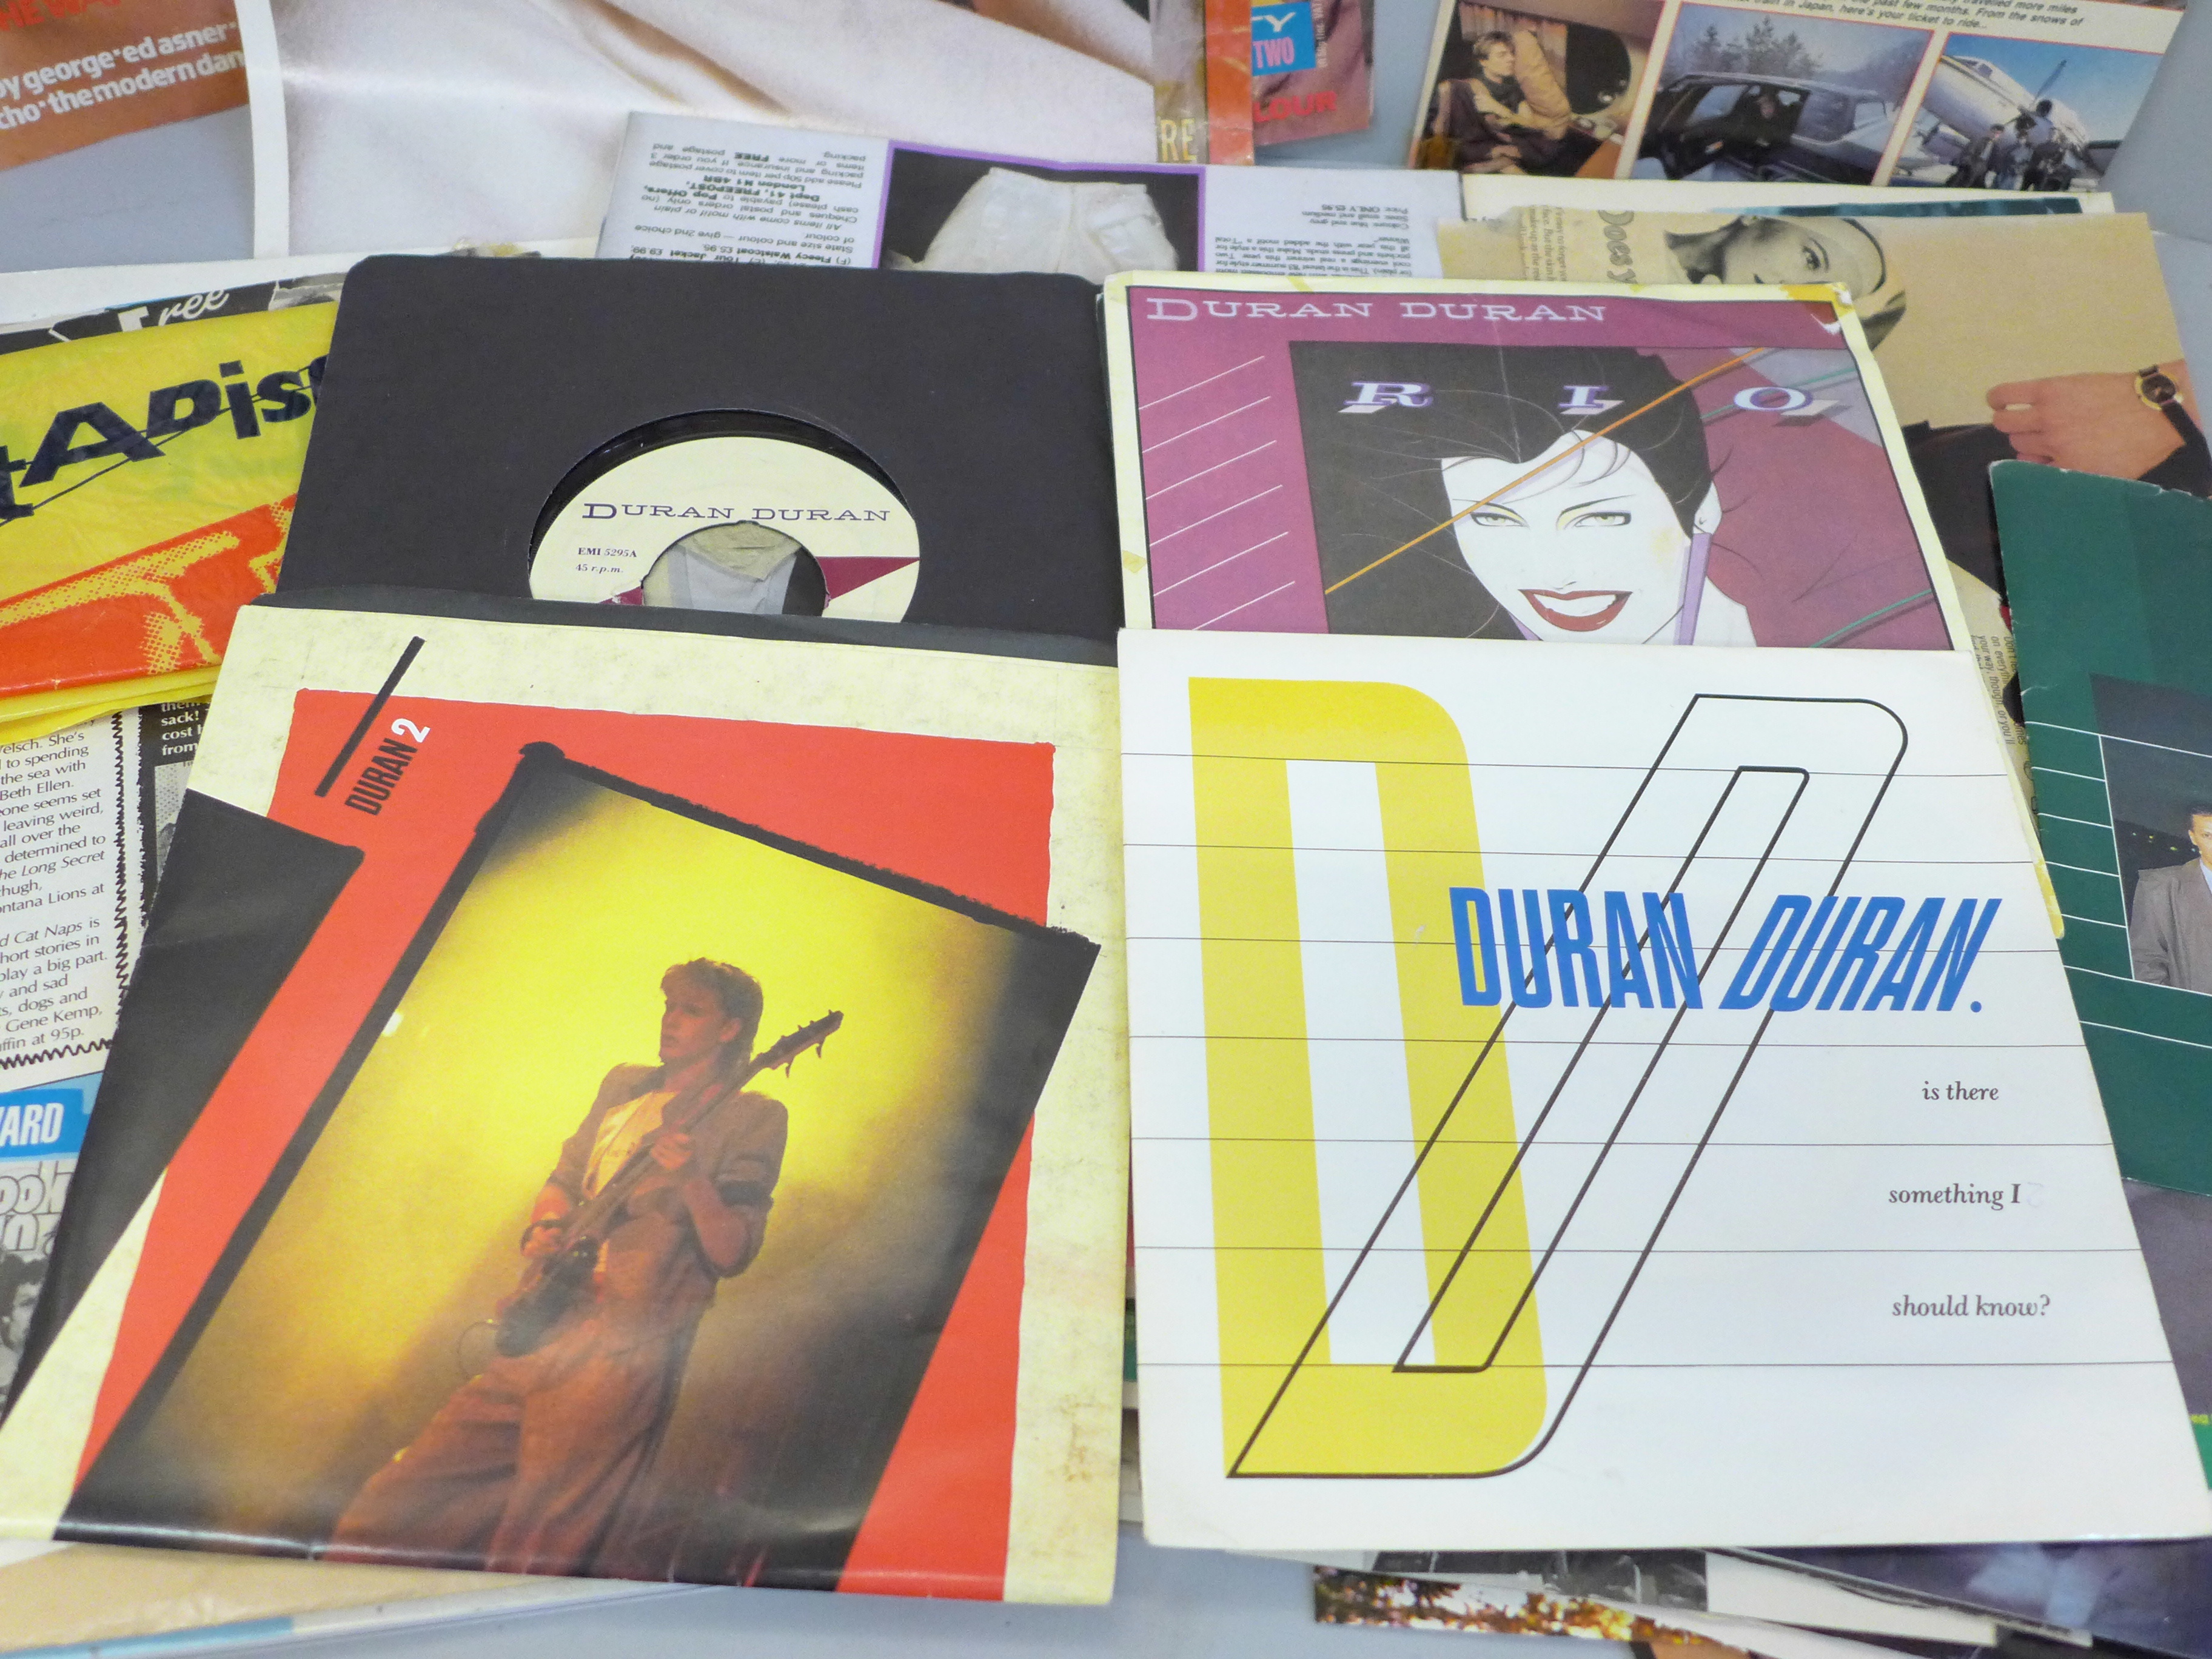 Duran Duran memorabilia including singles, posters, a book and fan club newsletters - Image 5 of 6